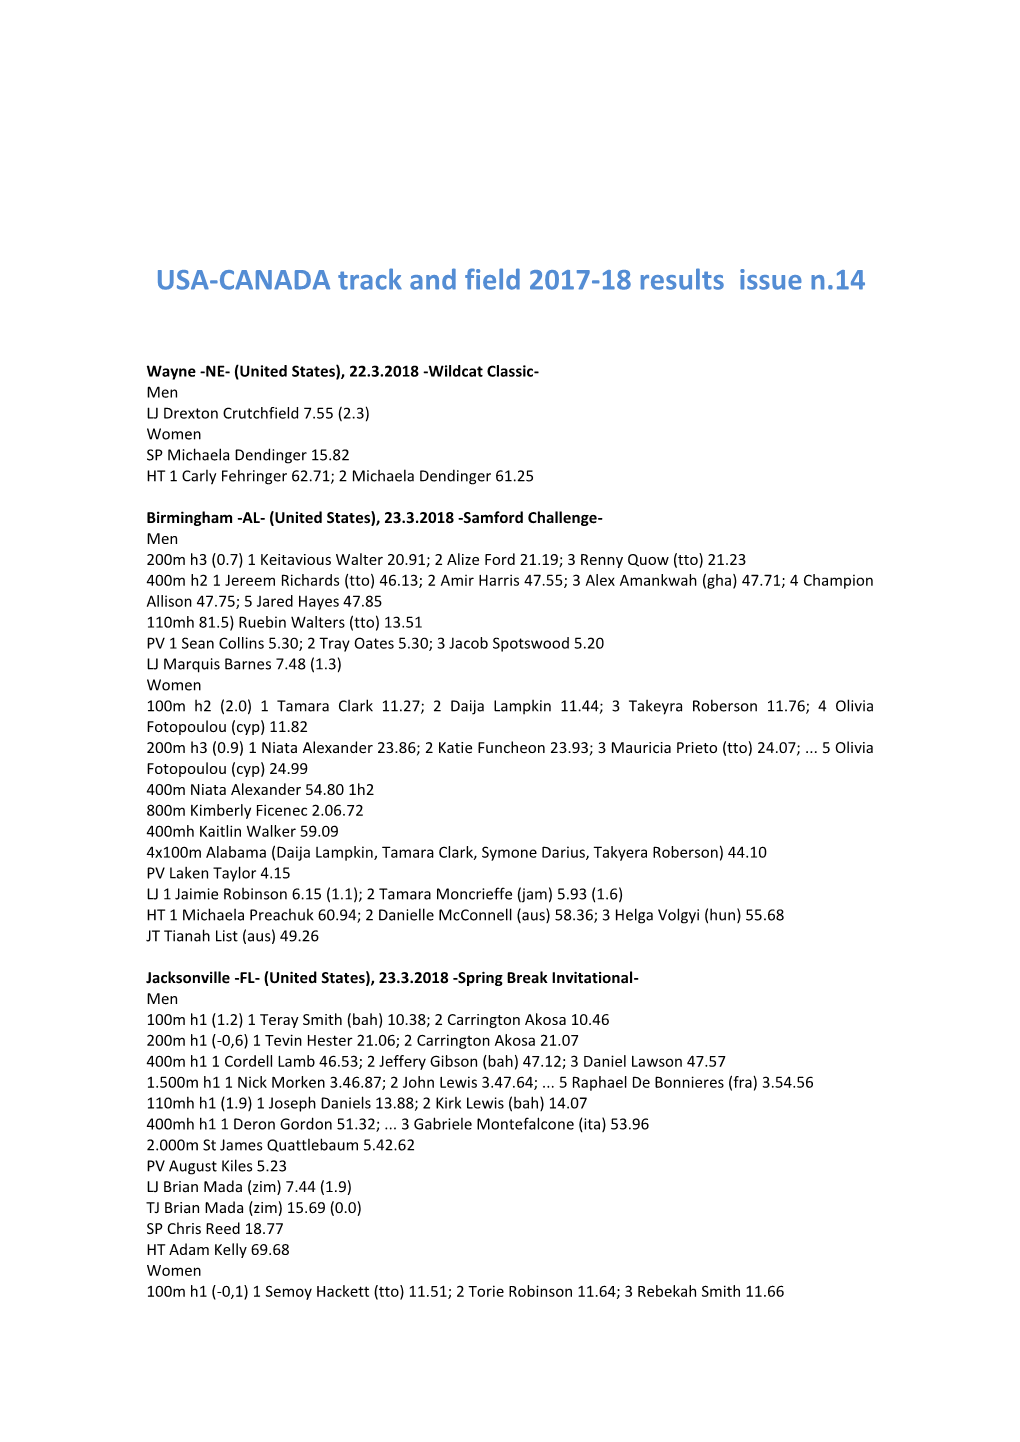 USA-CANADA Track and Field 2017-18 Results Issue N.14